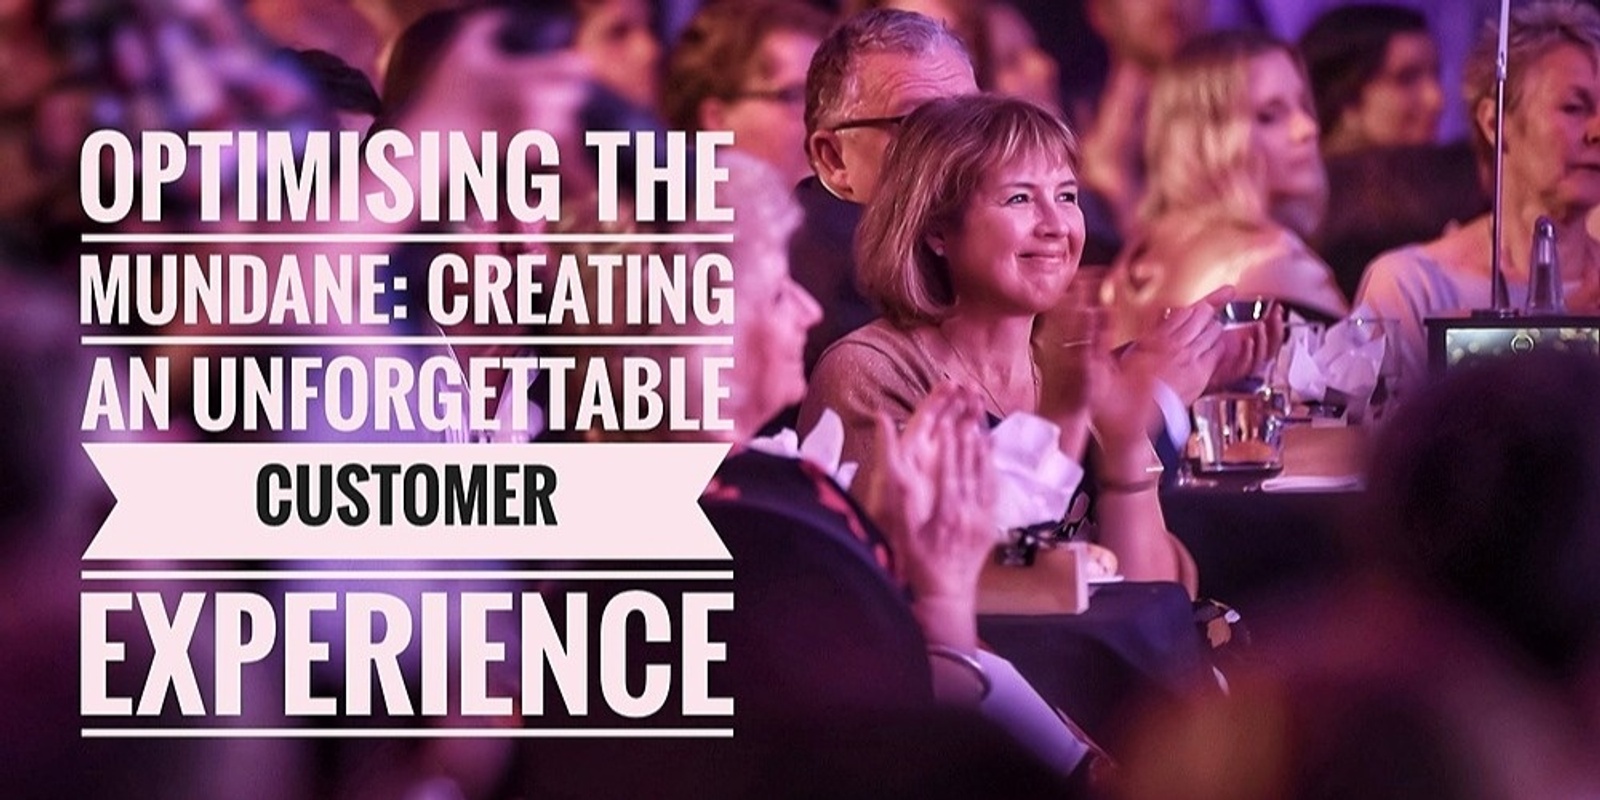 Banner image for Optimising the mundane: Creating an unforgettable customer experience